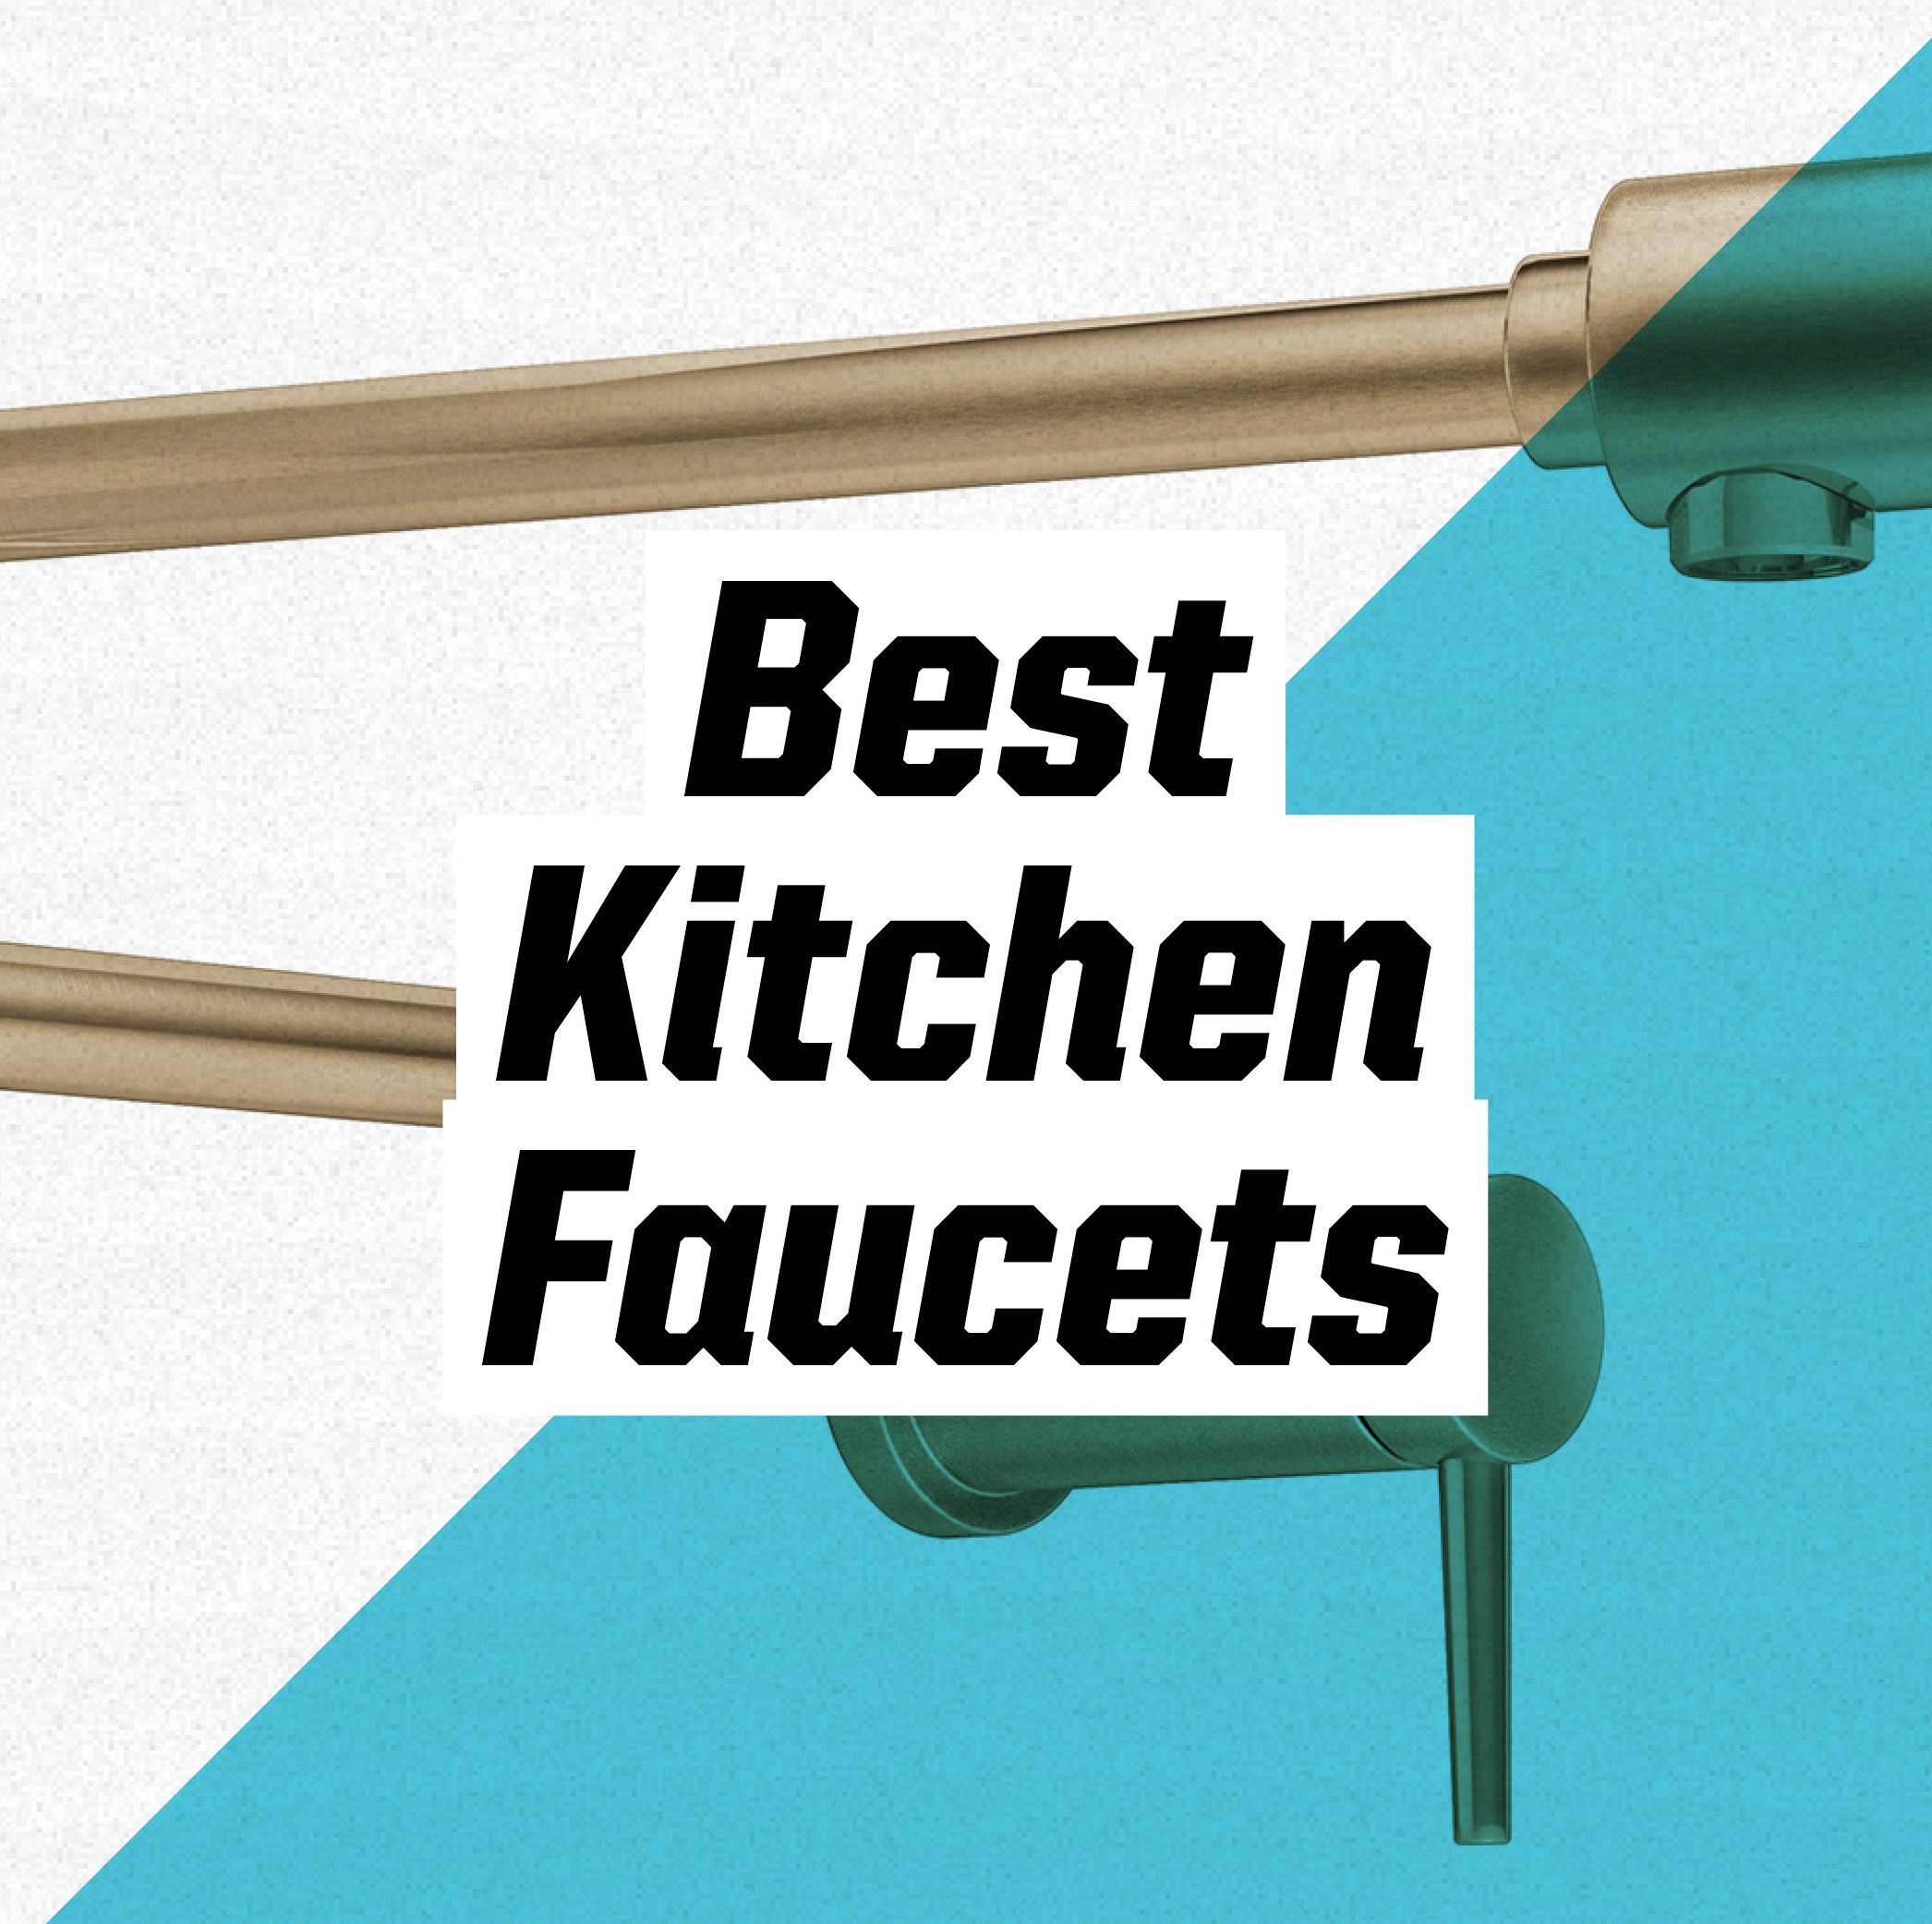 Here Are the 9 Most Popular Kitchen Faucet Styles